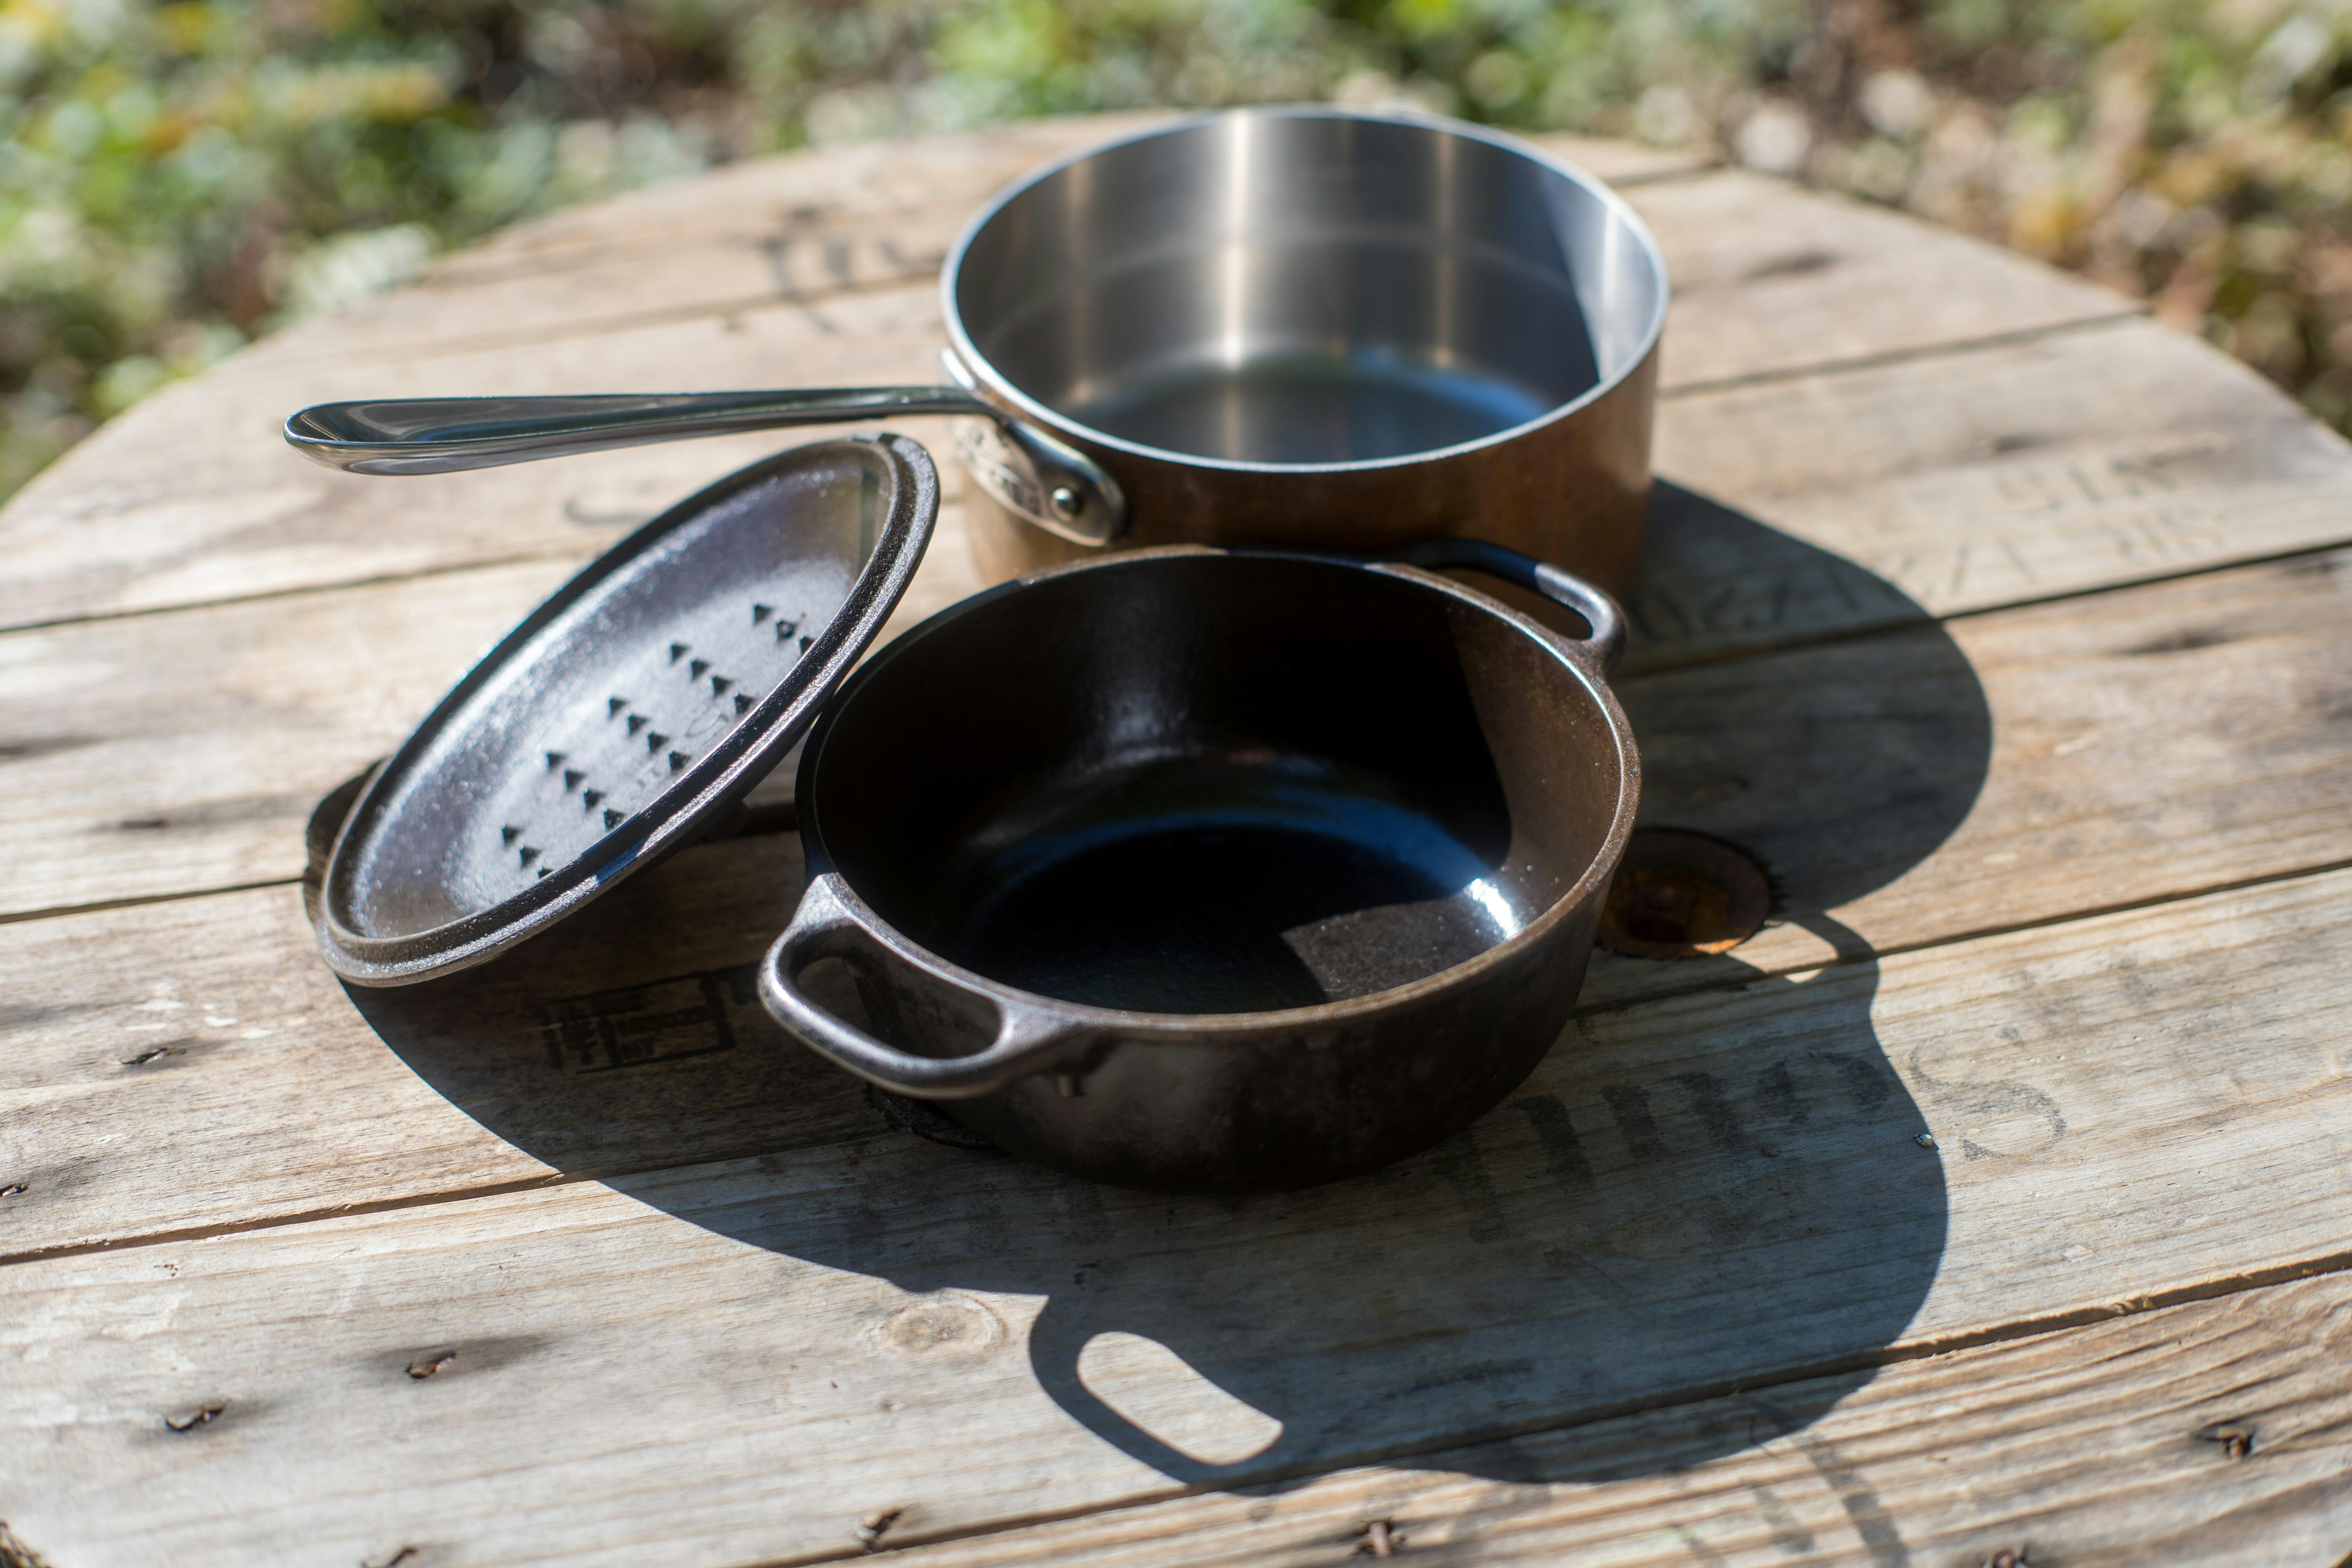 Dutch oven and stockpot on picnic table